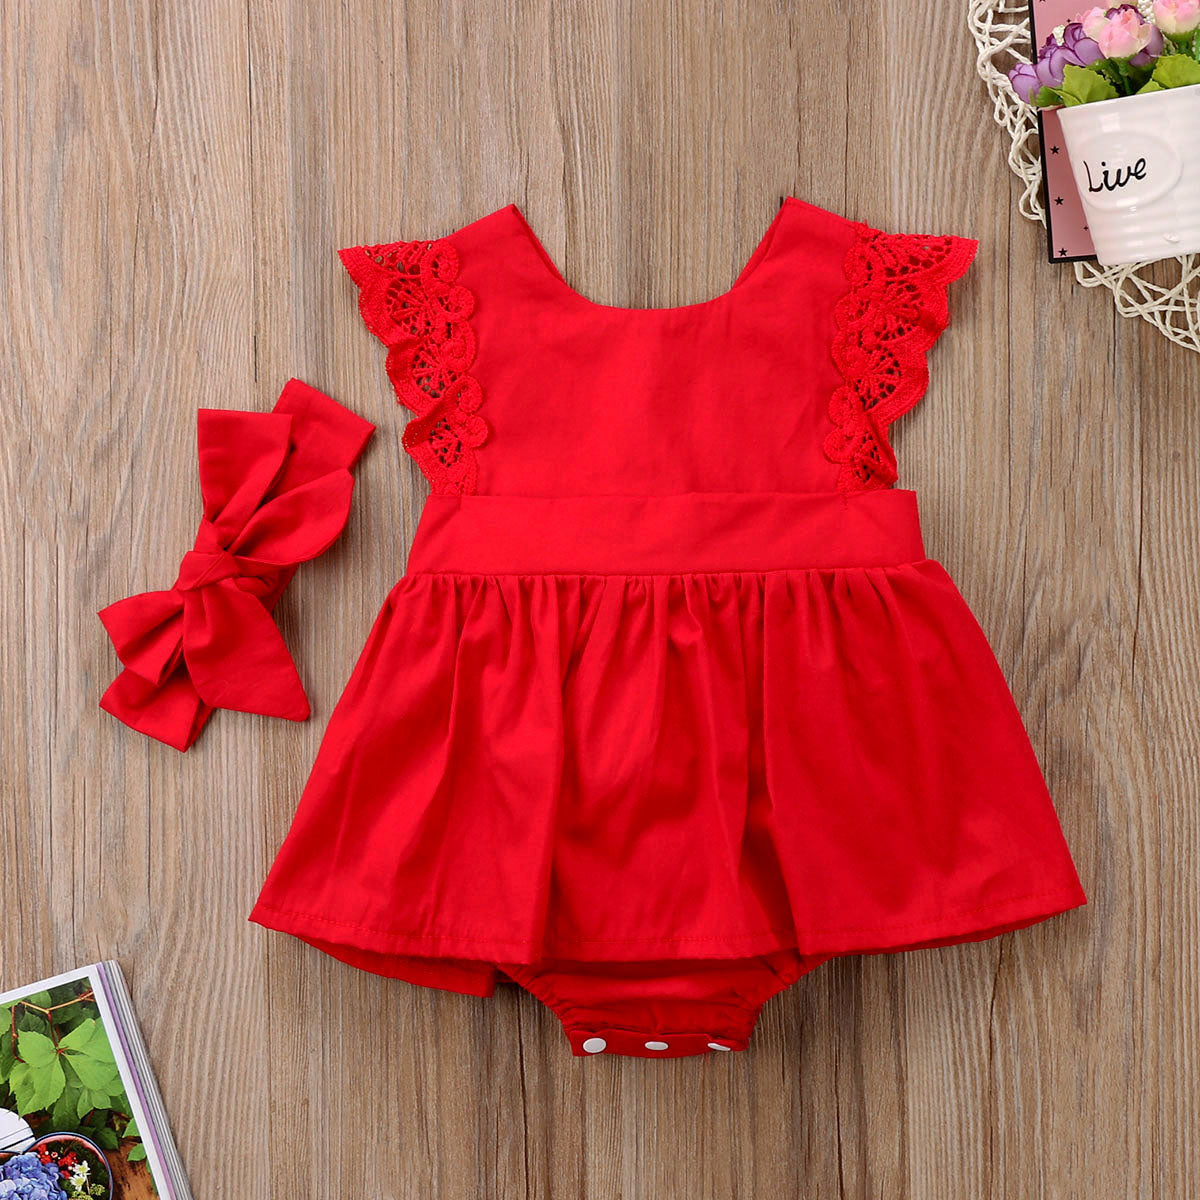 Baby Girl's Lace Dress Bodysuit and Bow Headband